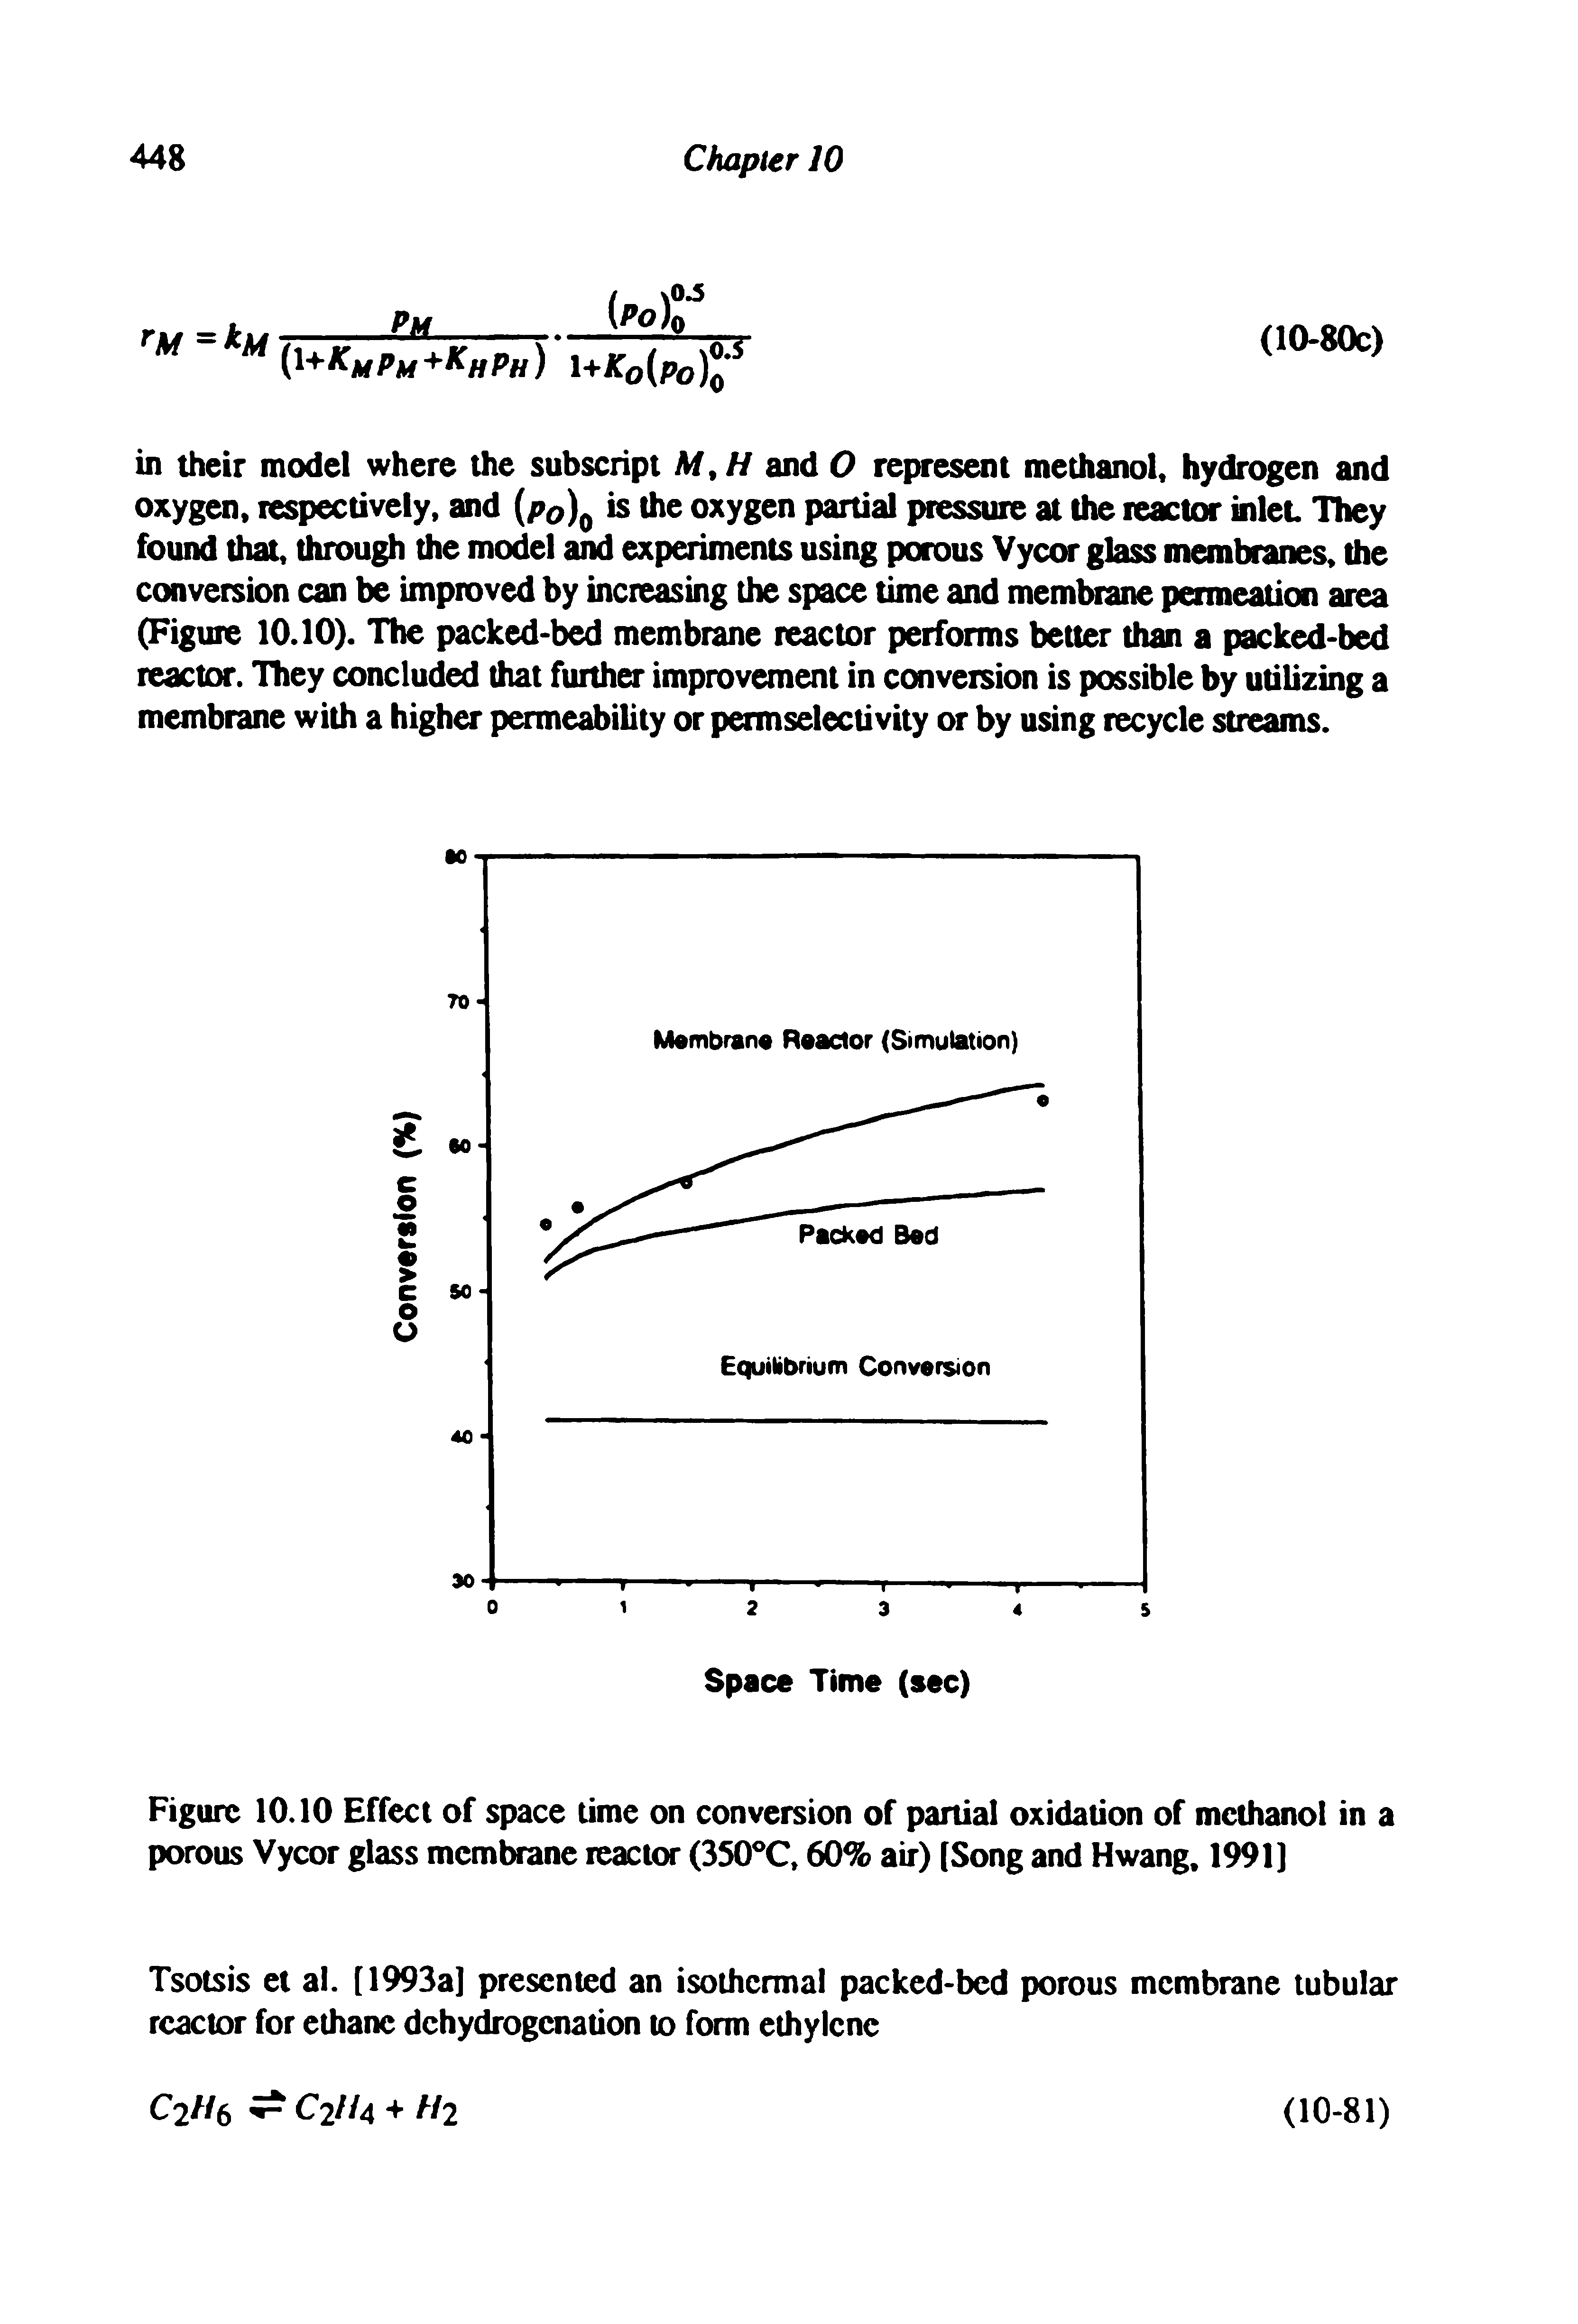 Figure 10.10 Effect of space time on conversion of partial oxidation of methanol in a porous Vycor glass membrane reactor (350 C, 60% air) [Song and Hwang, 1991]...